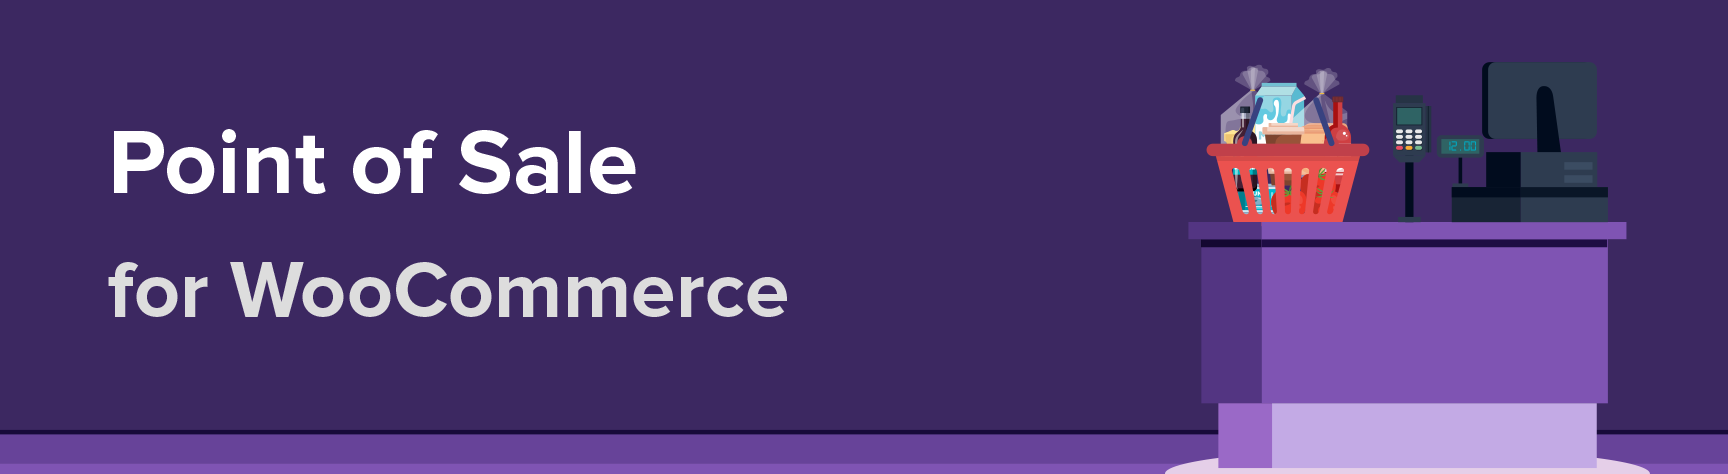 point-of-sale-woocommerce.png